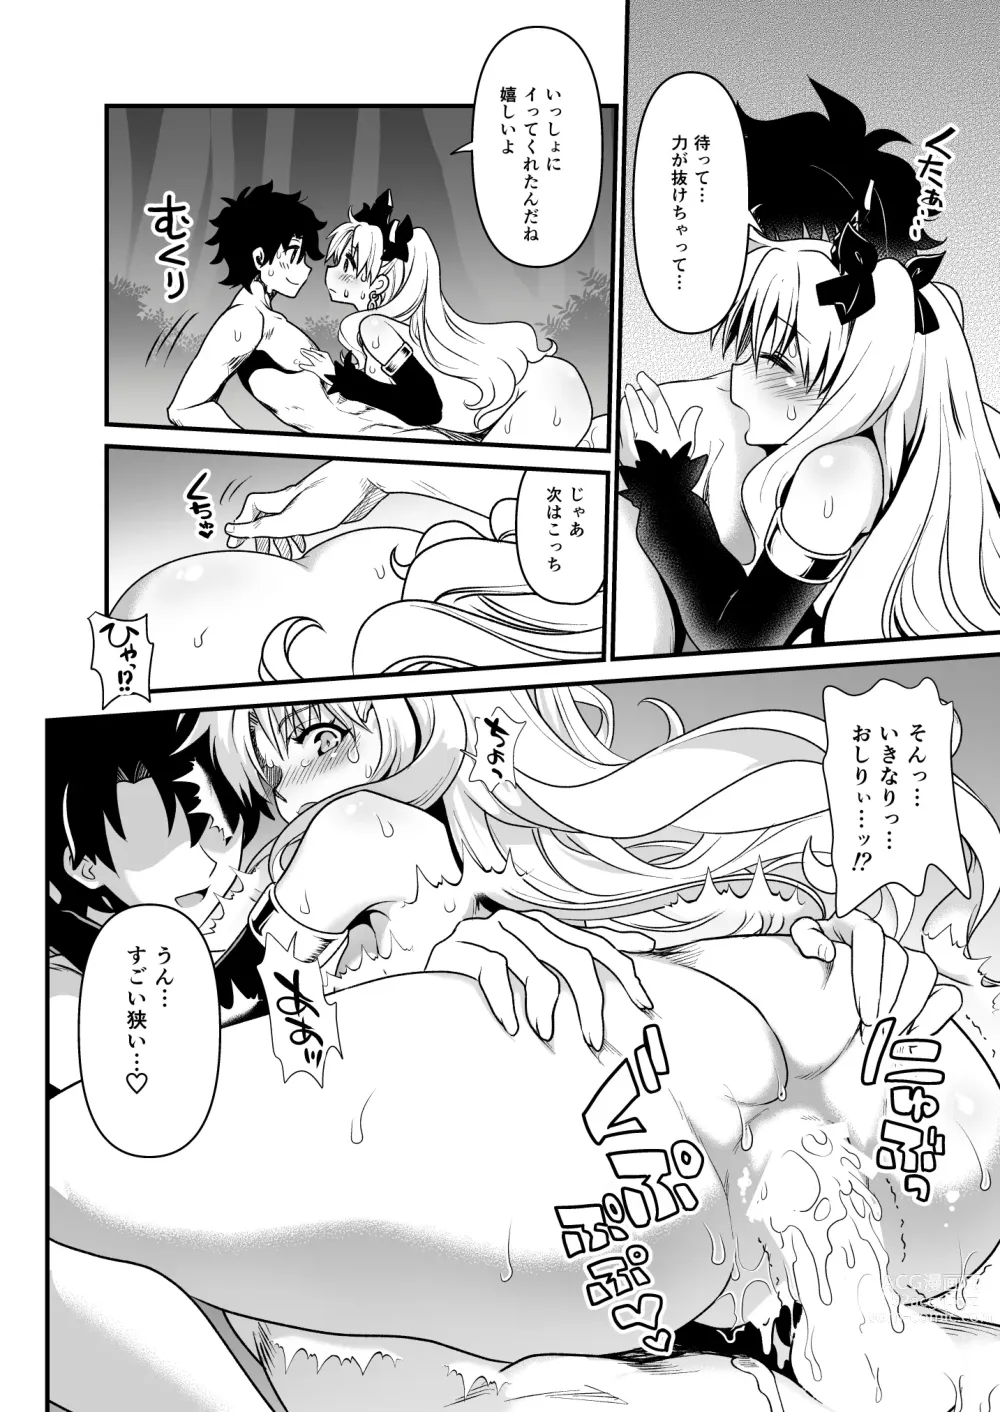 Page 13 of doujinshi All Night Romance 3